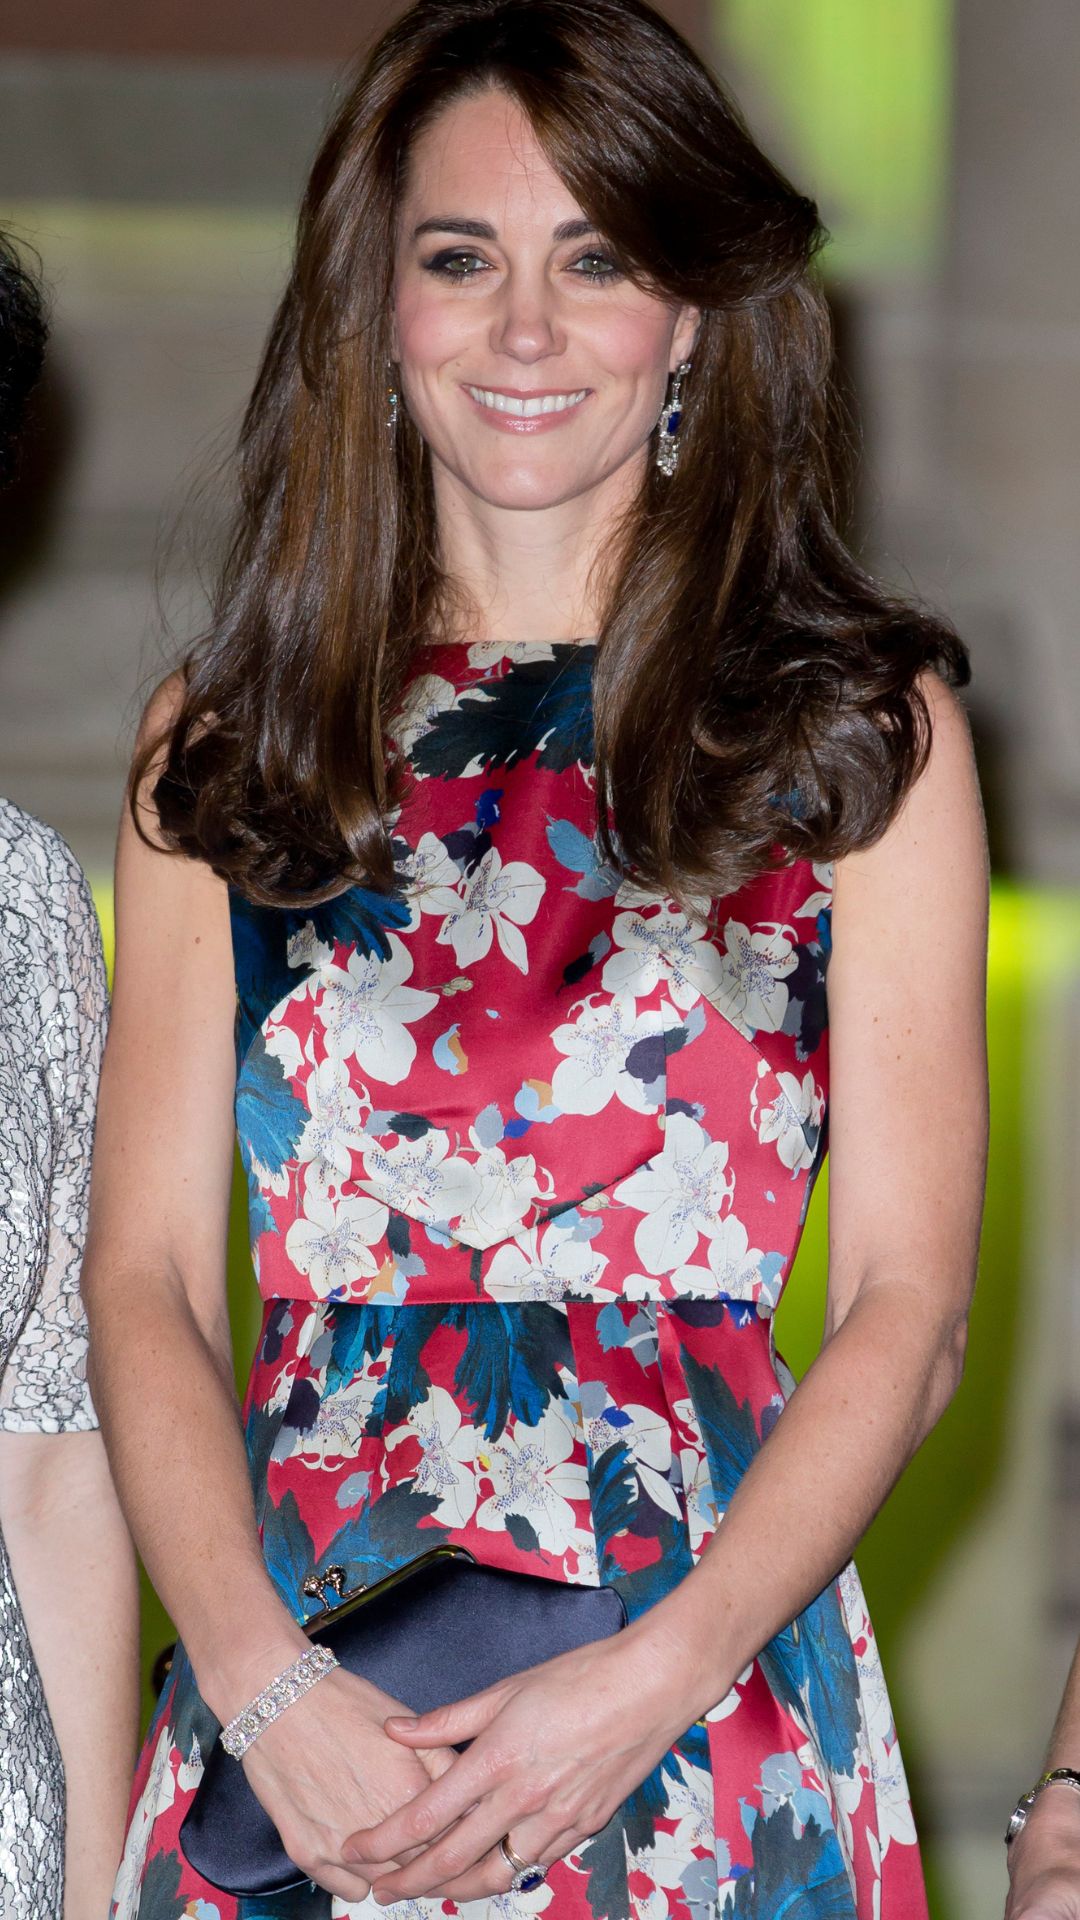 Kate Middleton debuted curtain bangs and a satin floral gown | Woman & Home